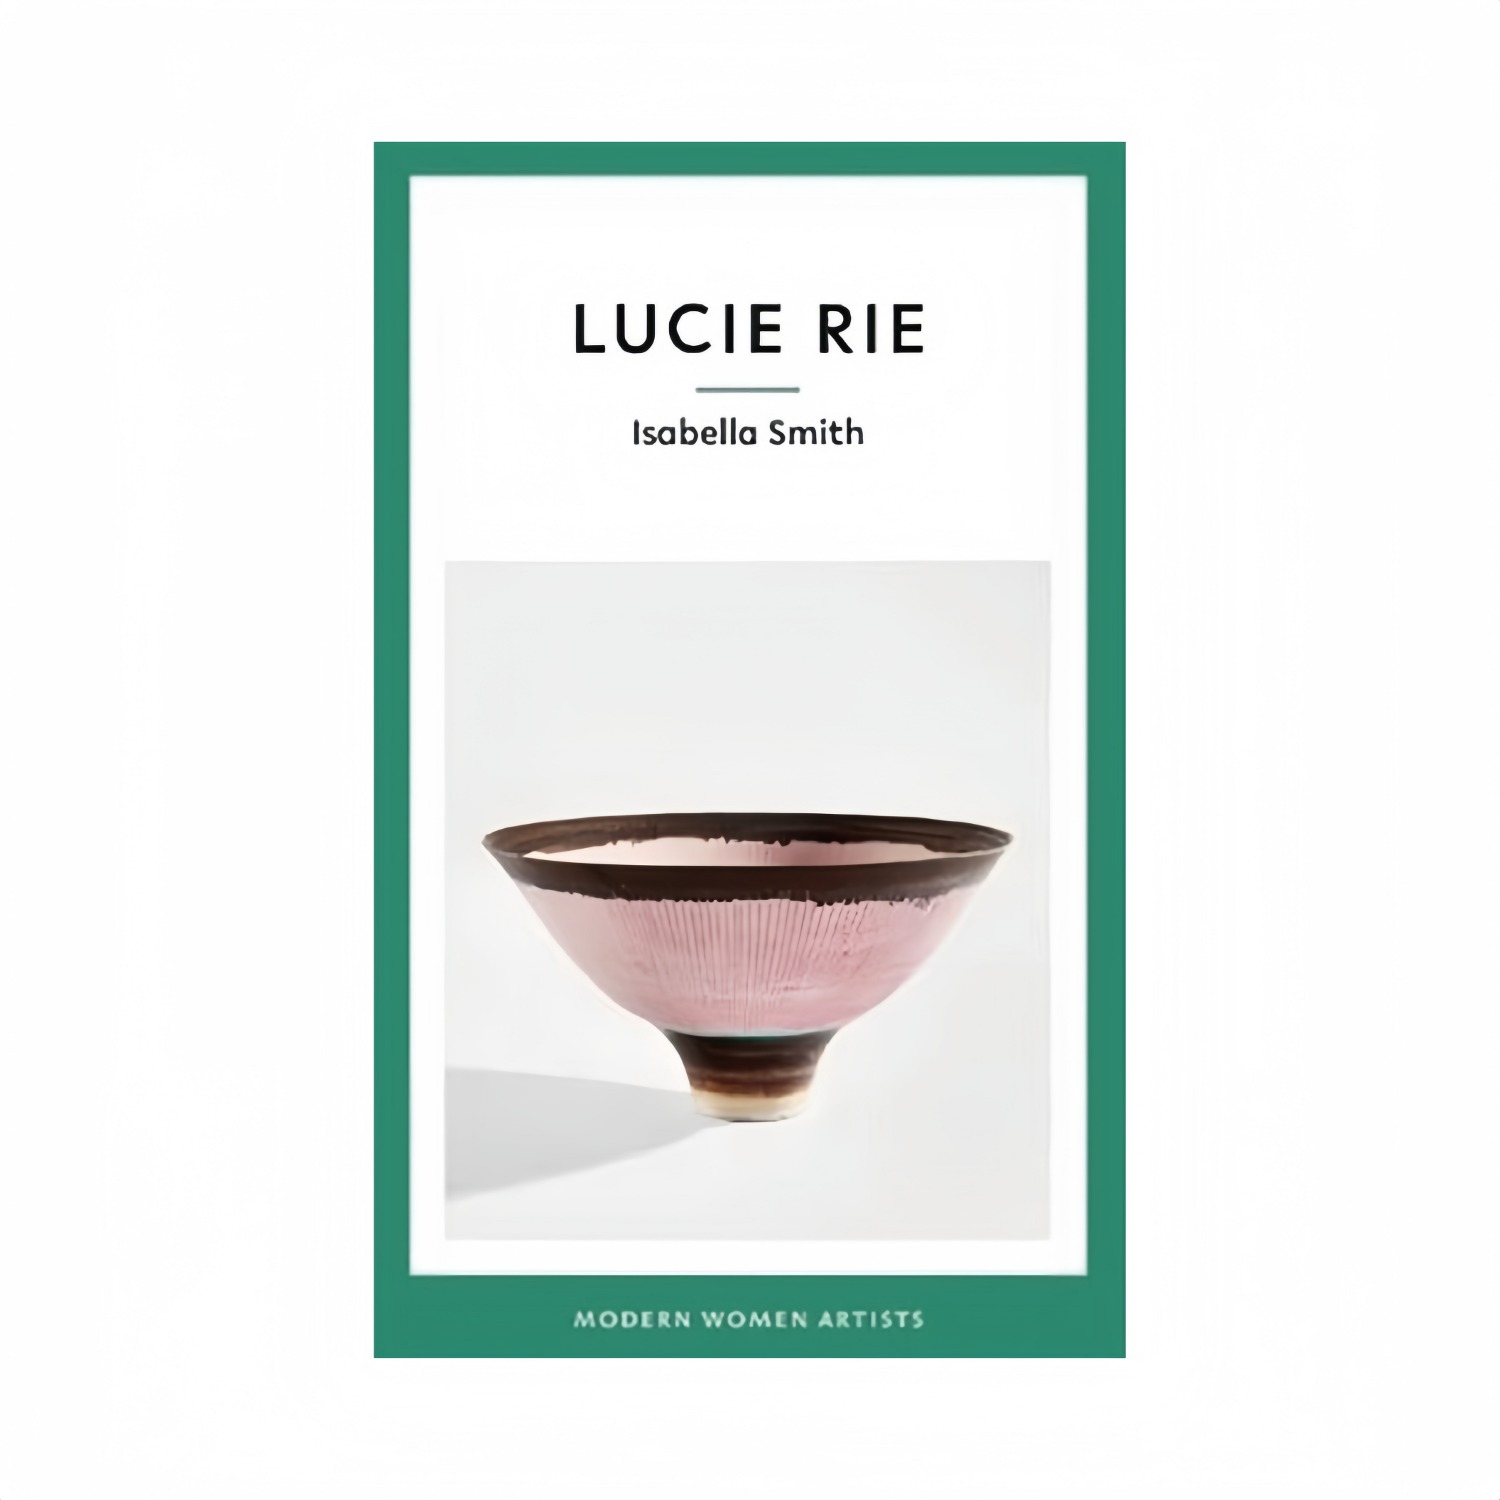 Lucie Rie: Isabella Smith